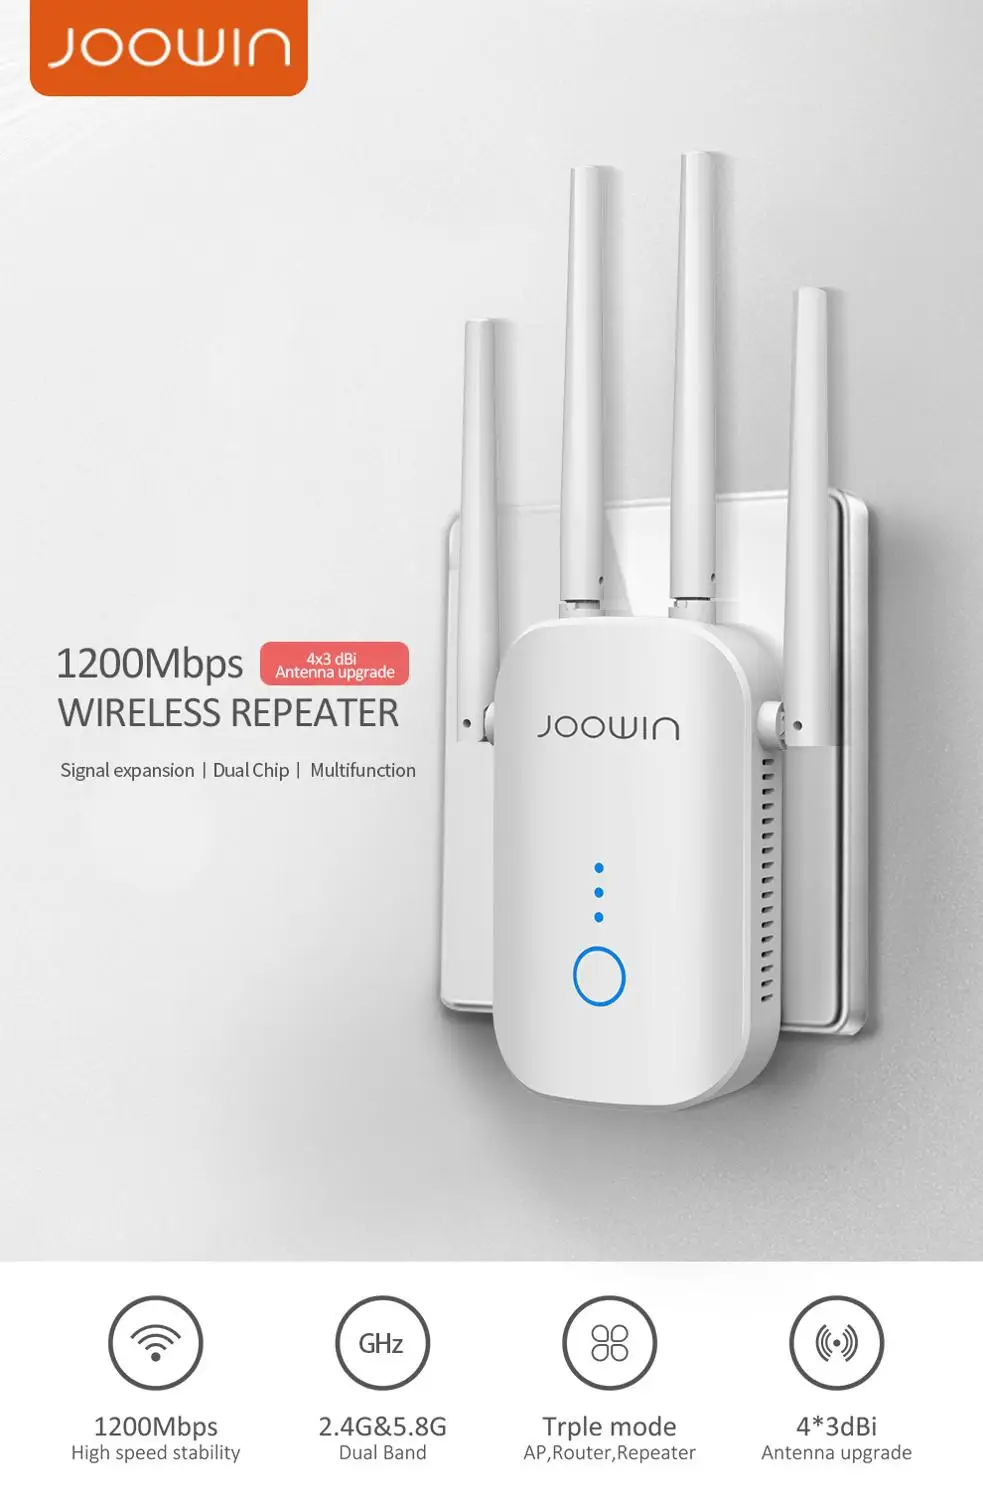 WiFi Extender WiFi Signal Booster with Router/Repeater/Access Point Mode JOOWIN 300Mbps WiFi Range Extender 2.4GHz Wireless Repeater with External Antennas US Plug WPS